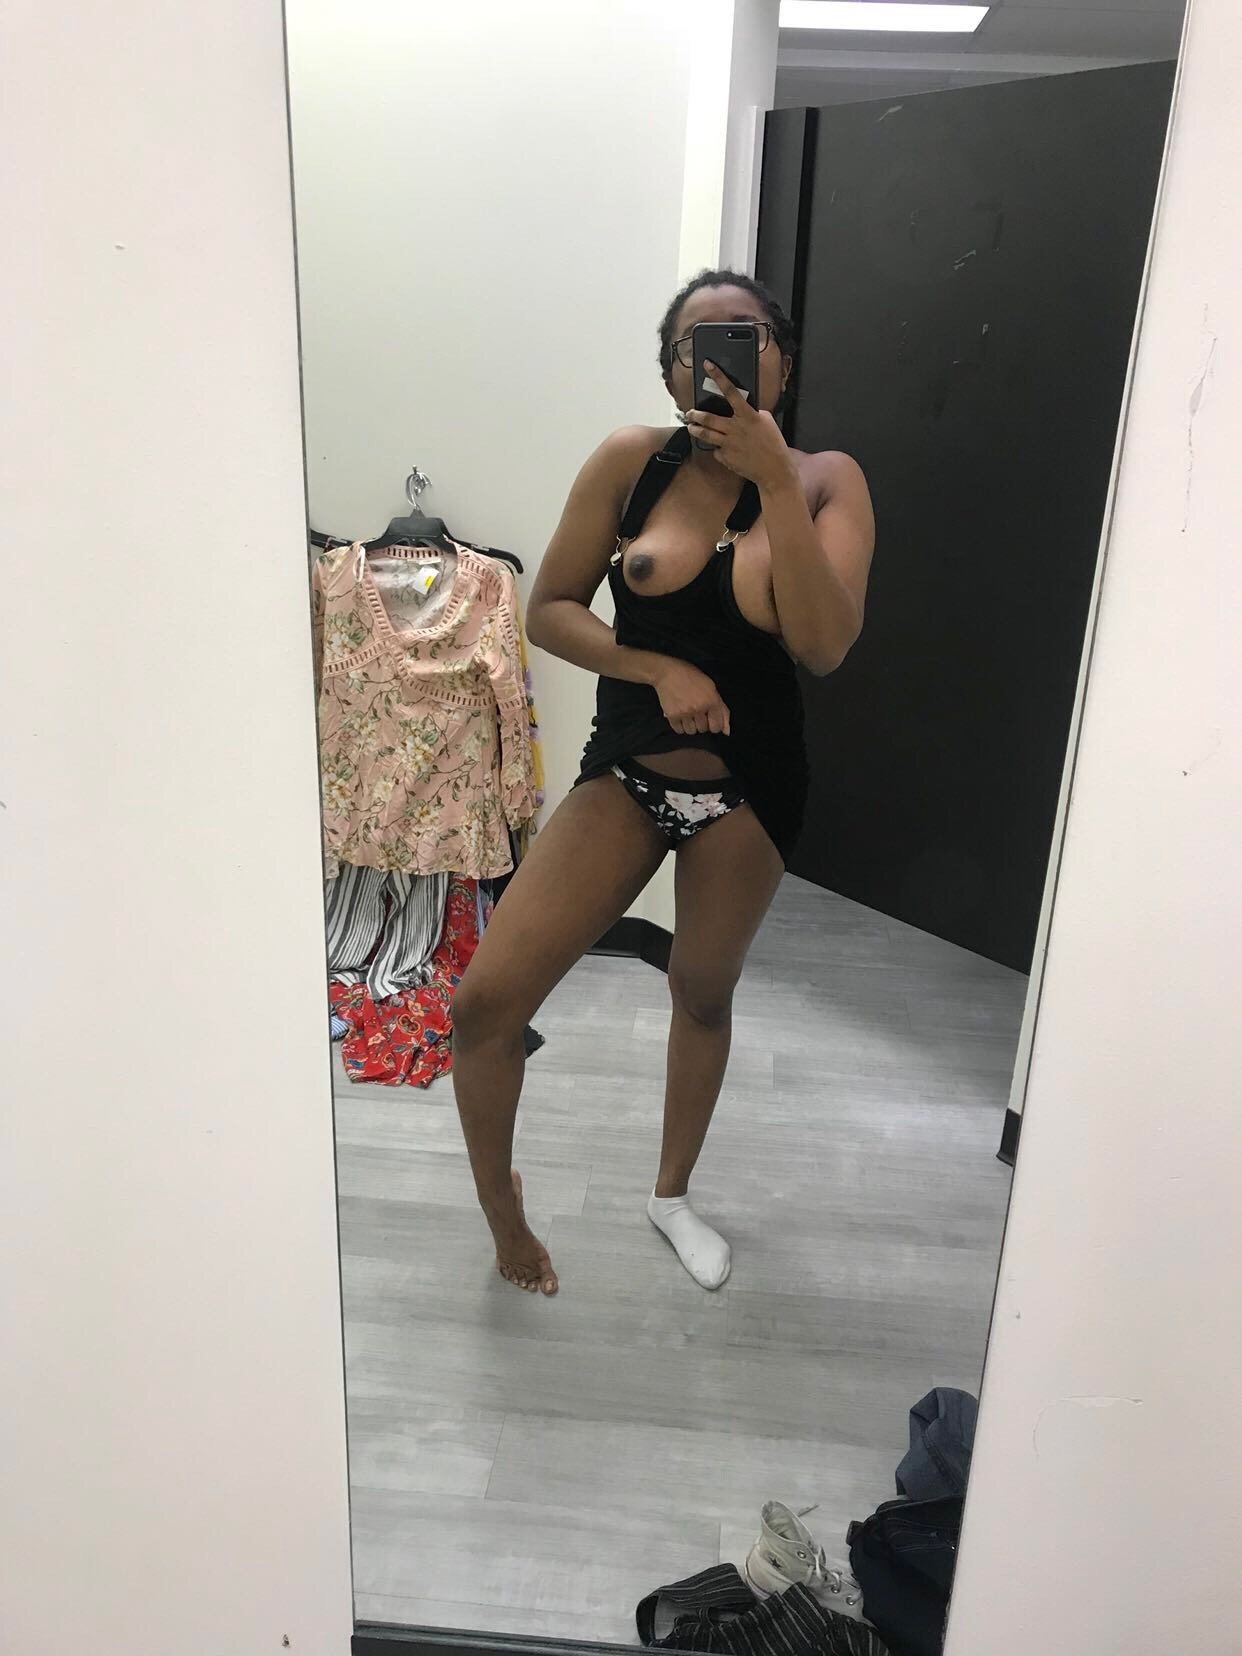 Photo by Thatoneslut with the username @Thatoneslut, who is a verified user,  December 22, 2018 at 11:51 PM. The post is about the topic Amateurs and the text says 'Got a little horny inthe dressing room. I’m too poor to buy cute stuff like this'